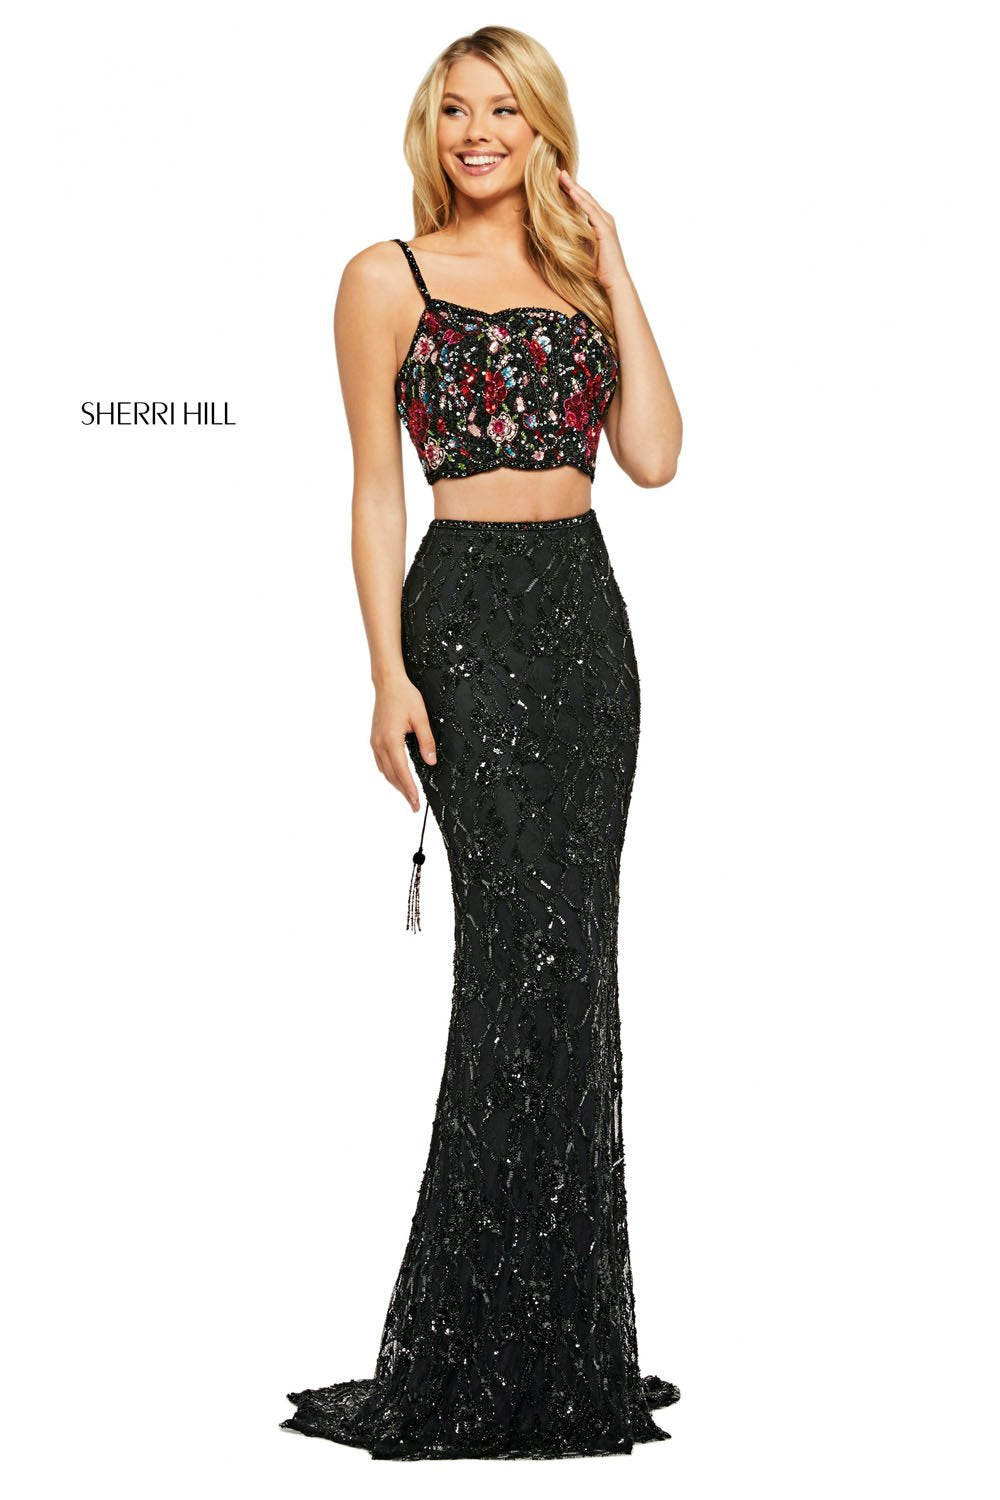 Sherri Hill 53445 dress images in these colors: Black Multi.